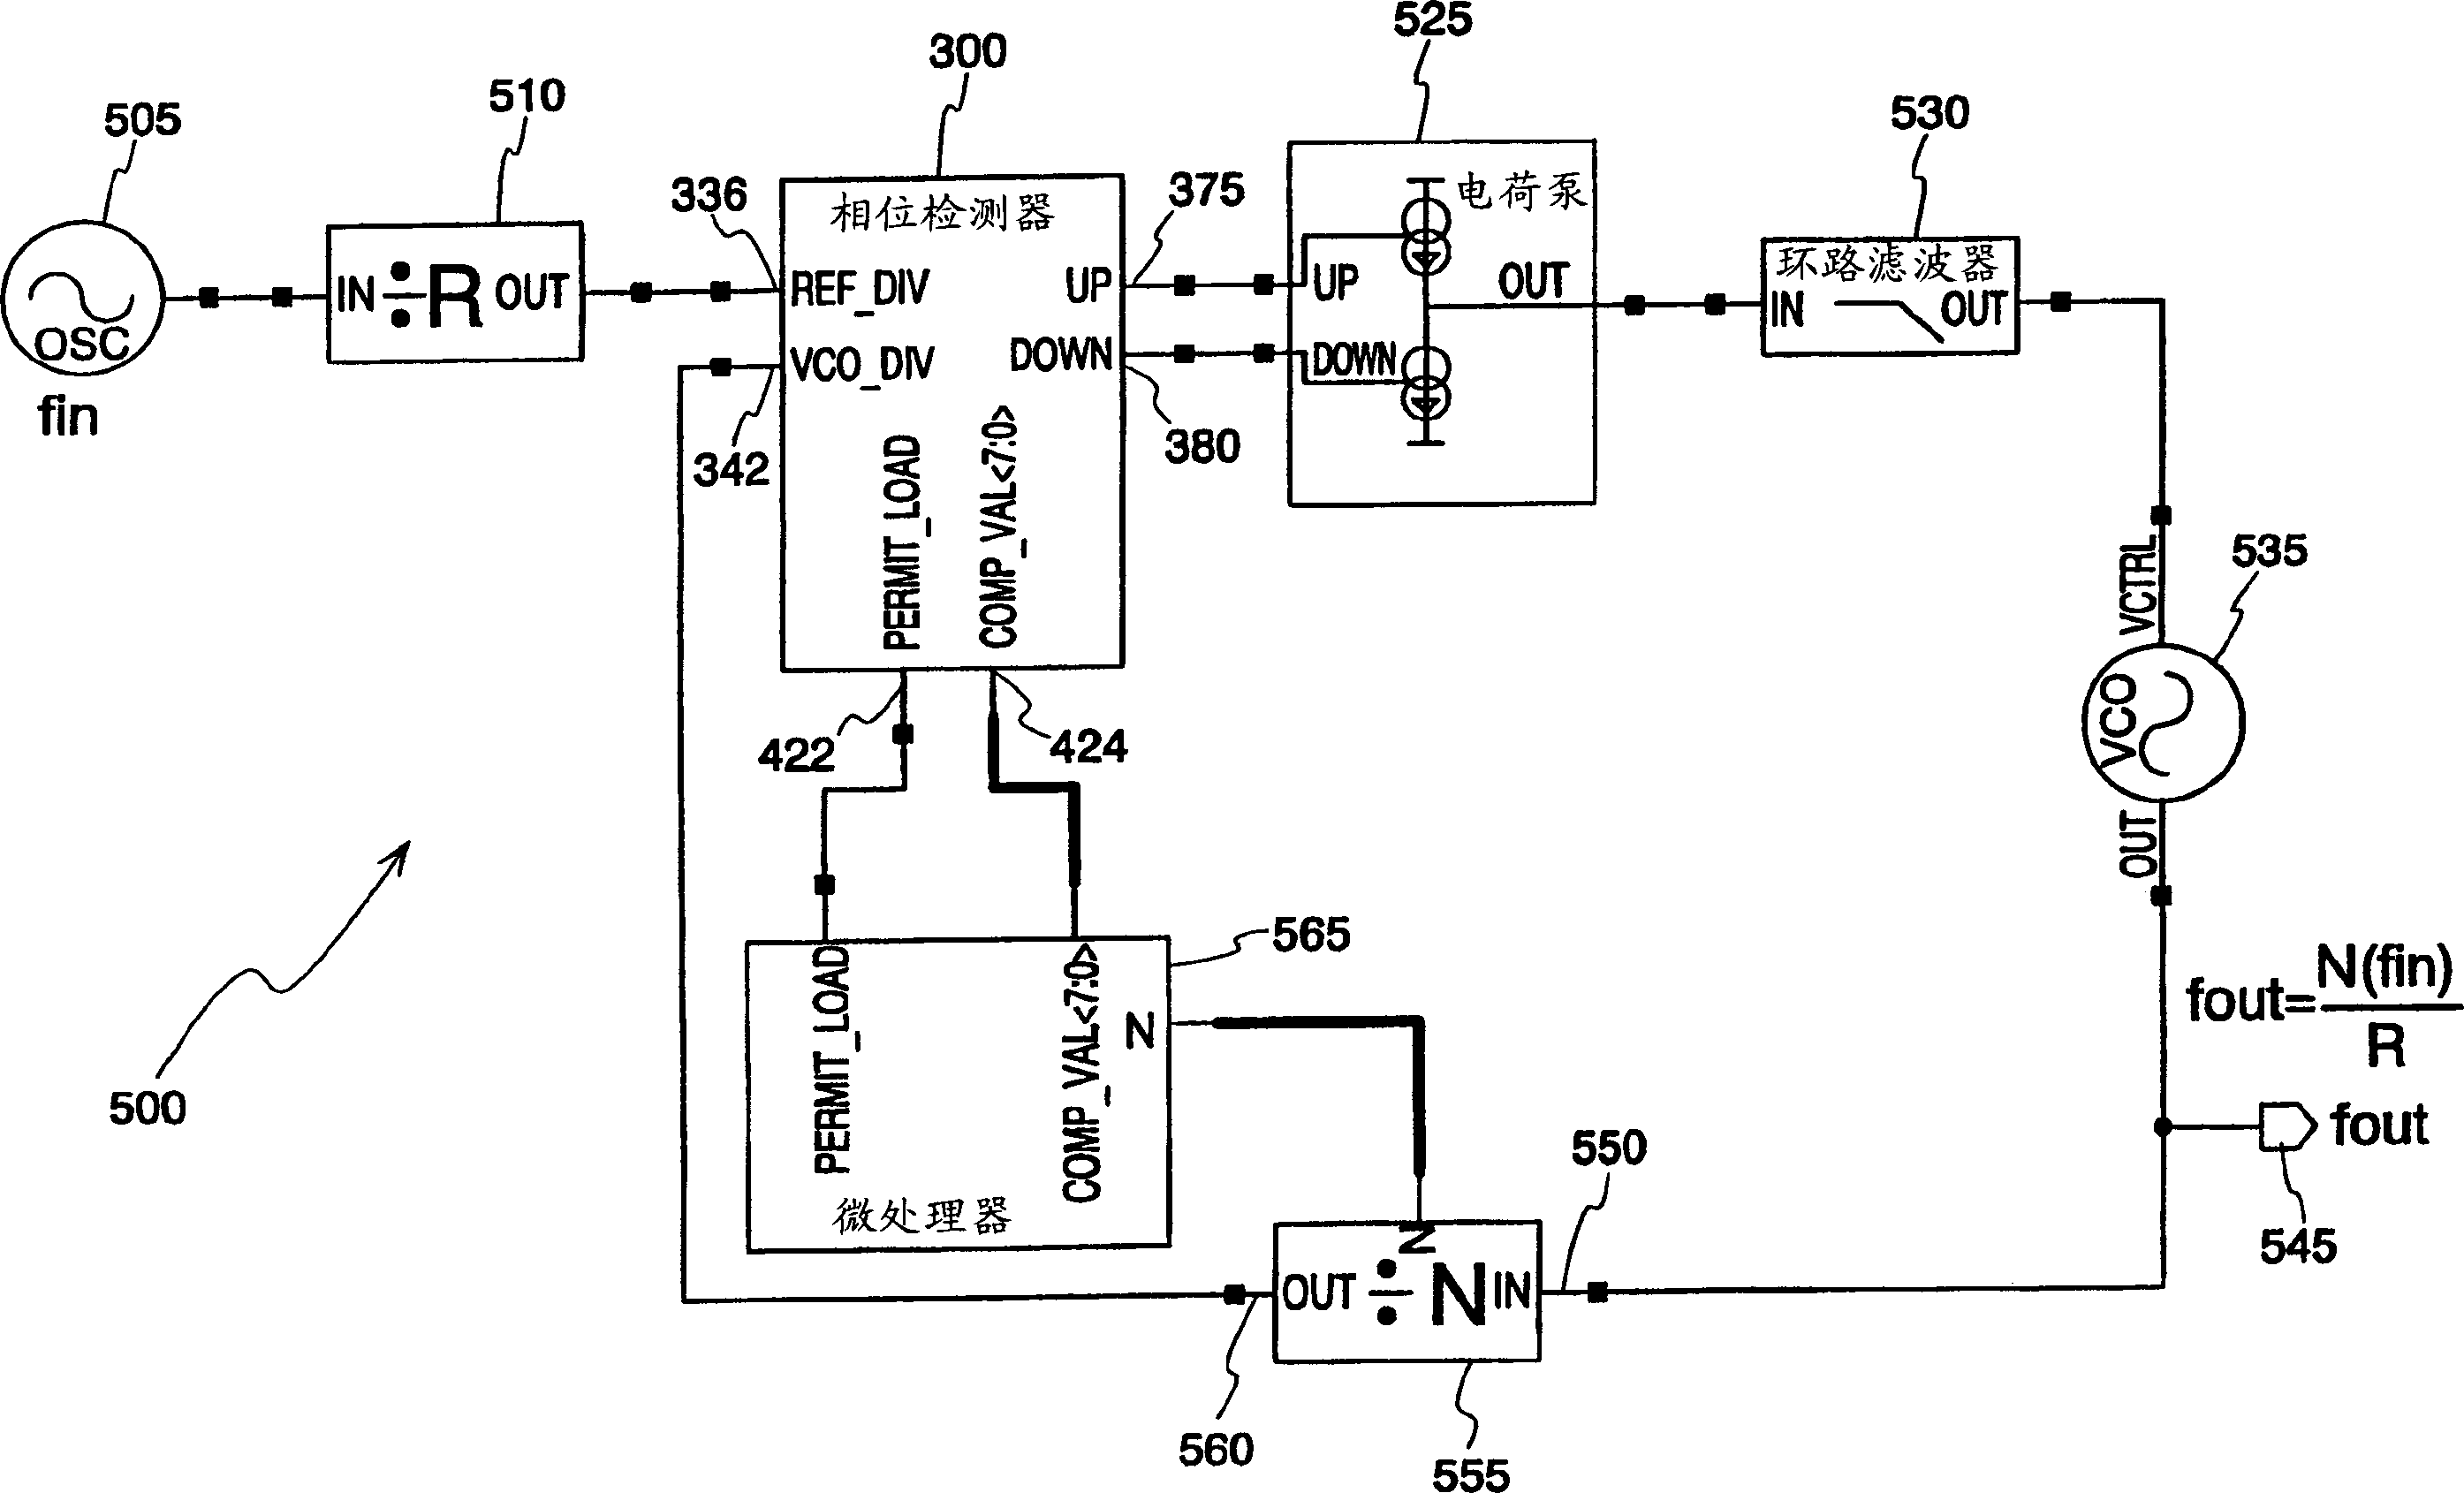 Slip-detecting phase detector and method for improving phase-lock loop lock time